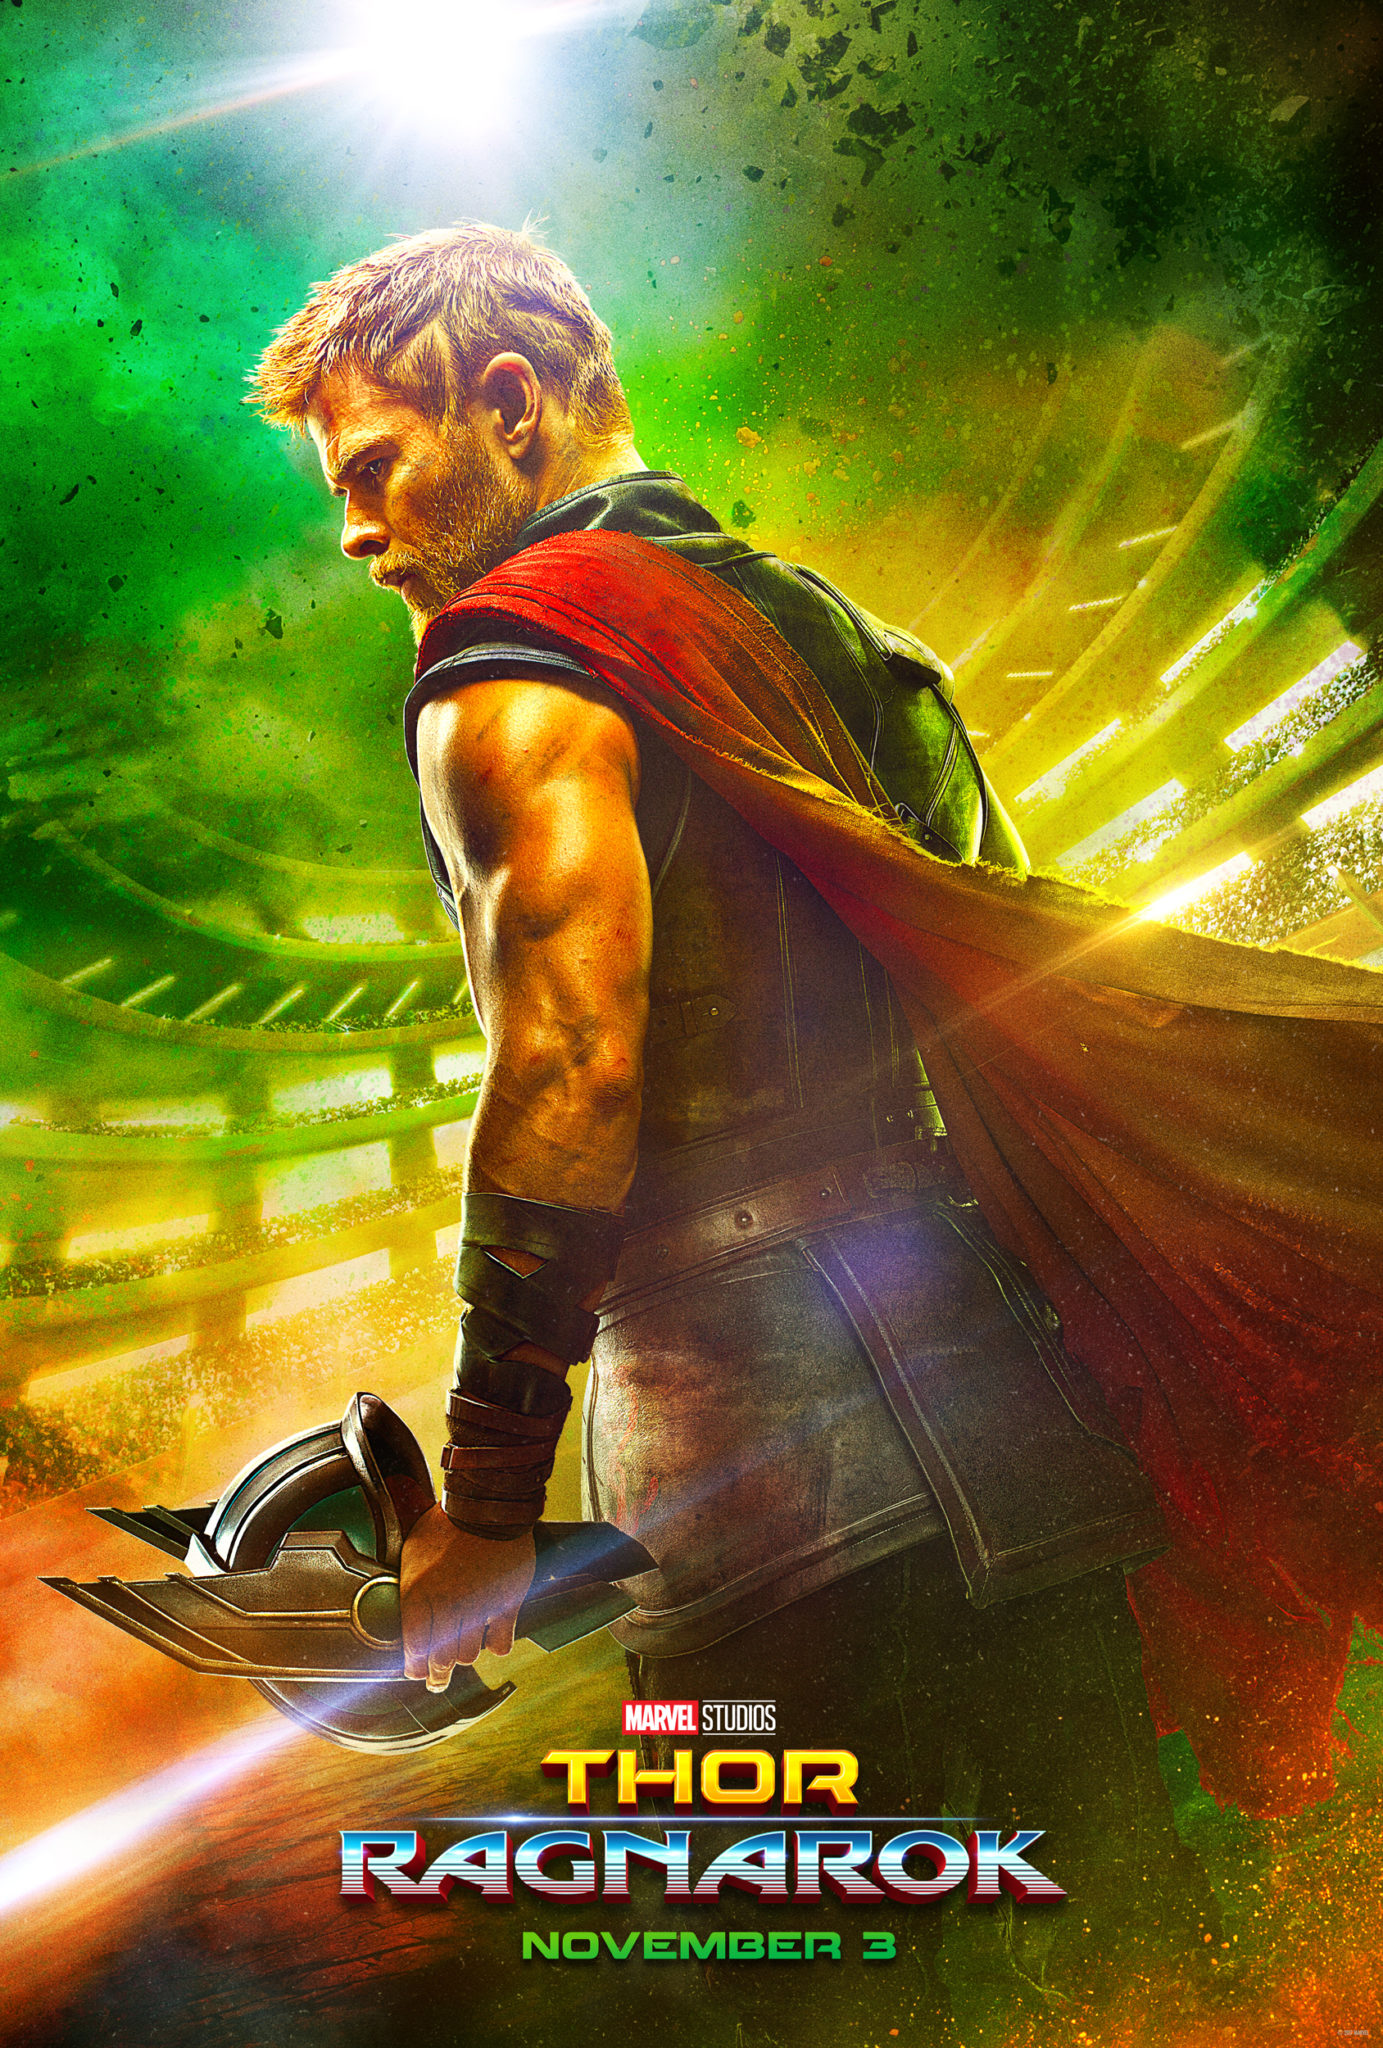 “Thor: Ragnarok” Trailer And Poster Is Here!